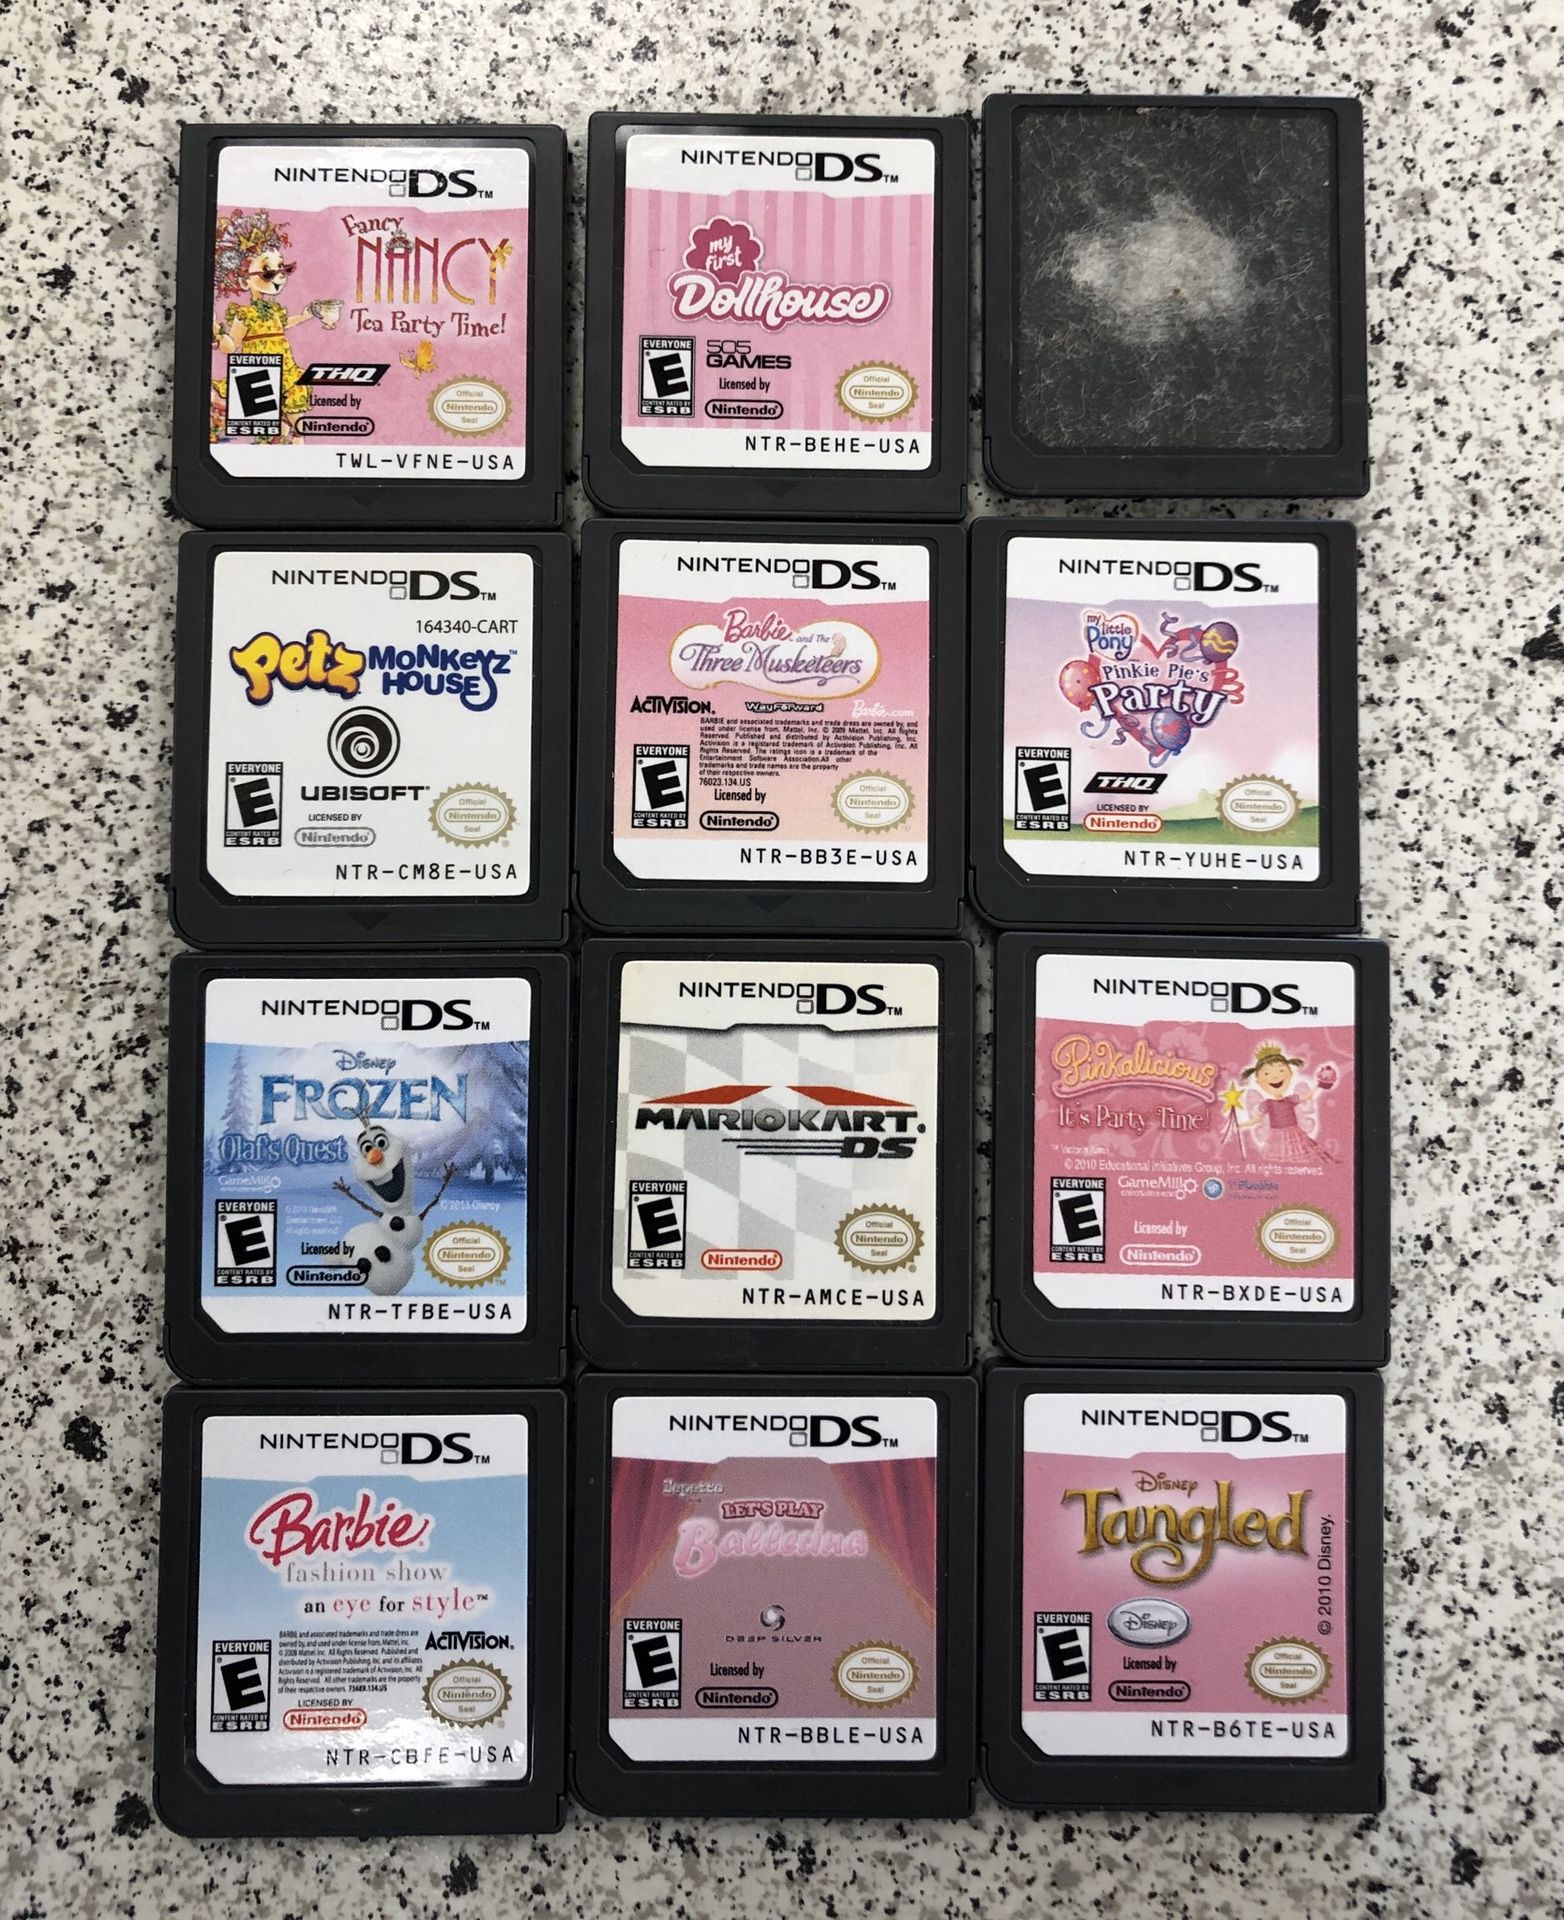 Nintendo DS Games. One without sticker is Nintendogs